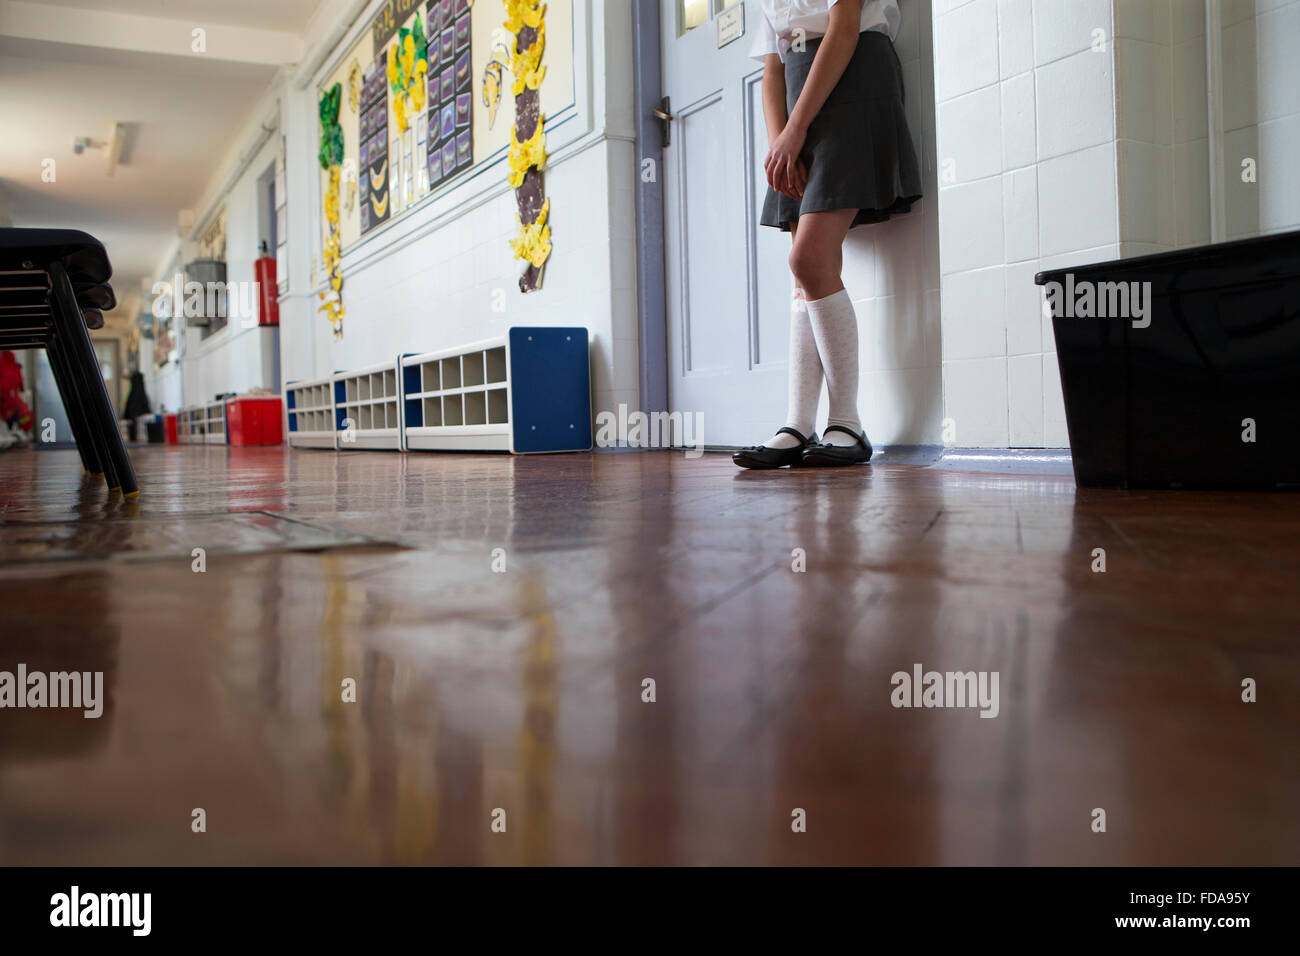 Naughty school girl stands in the corridor after being sent out of class. Stock Photo